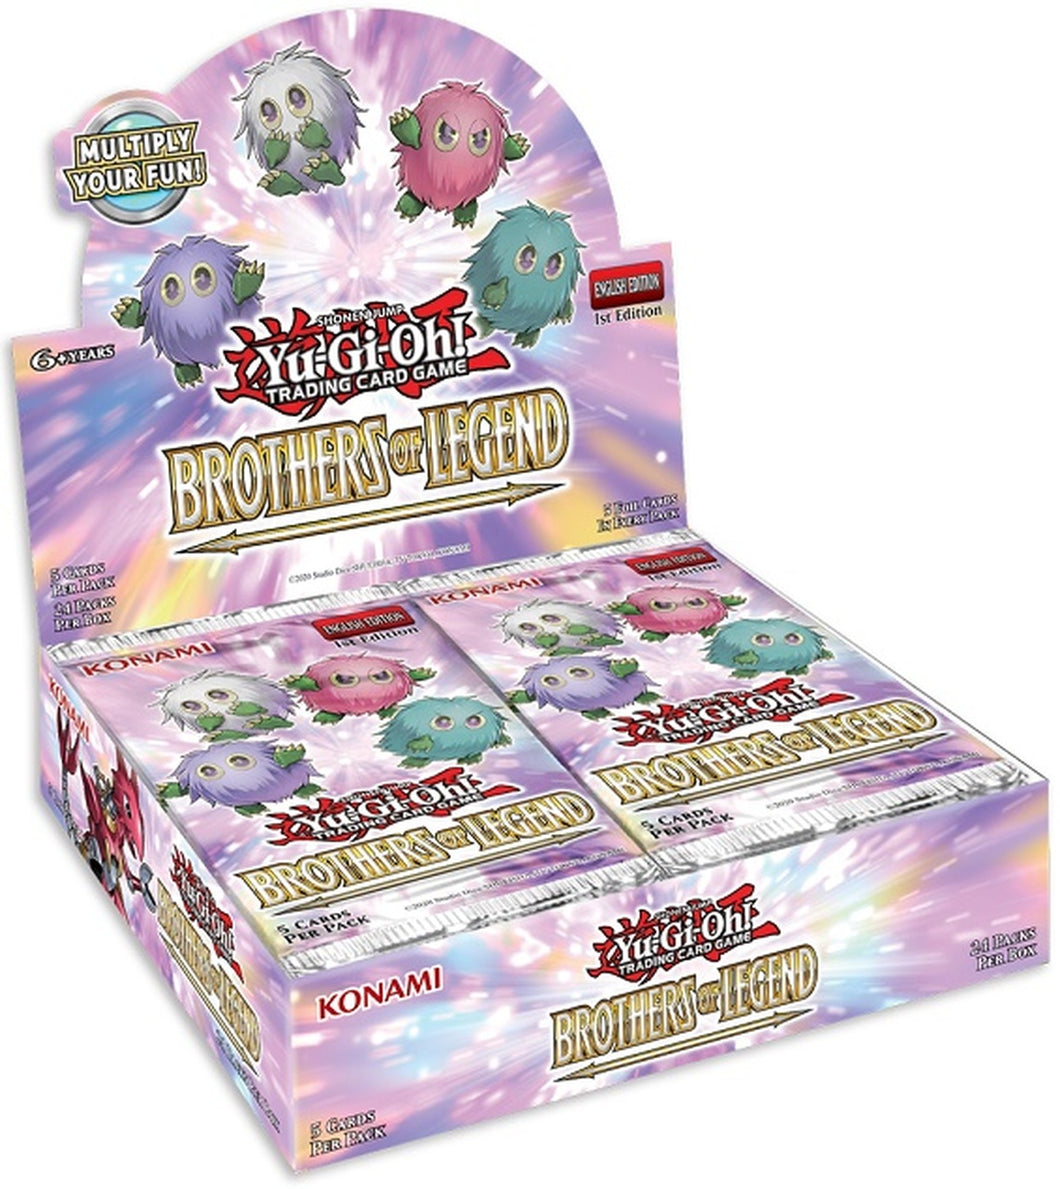 Brothers of Legend 1st Edition Booster Box